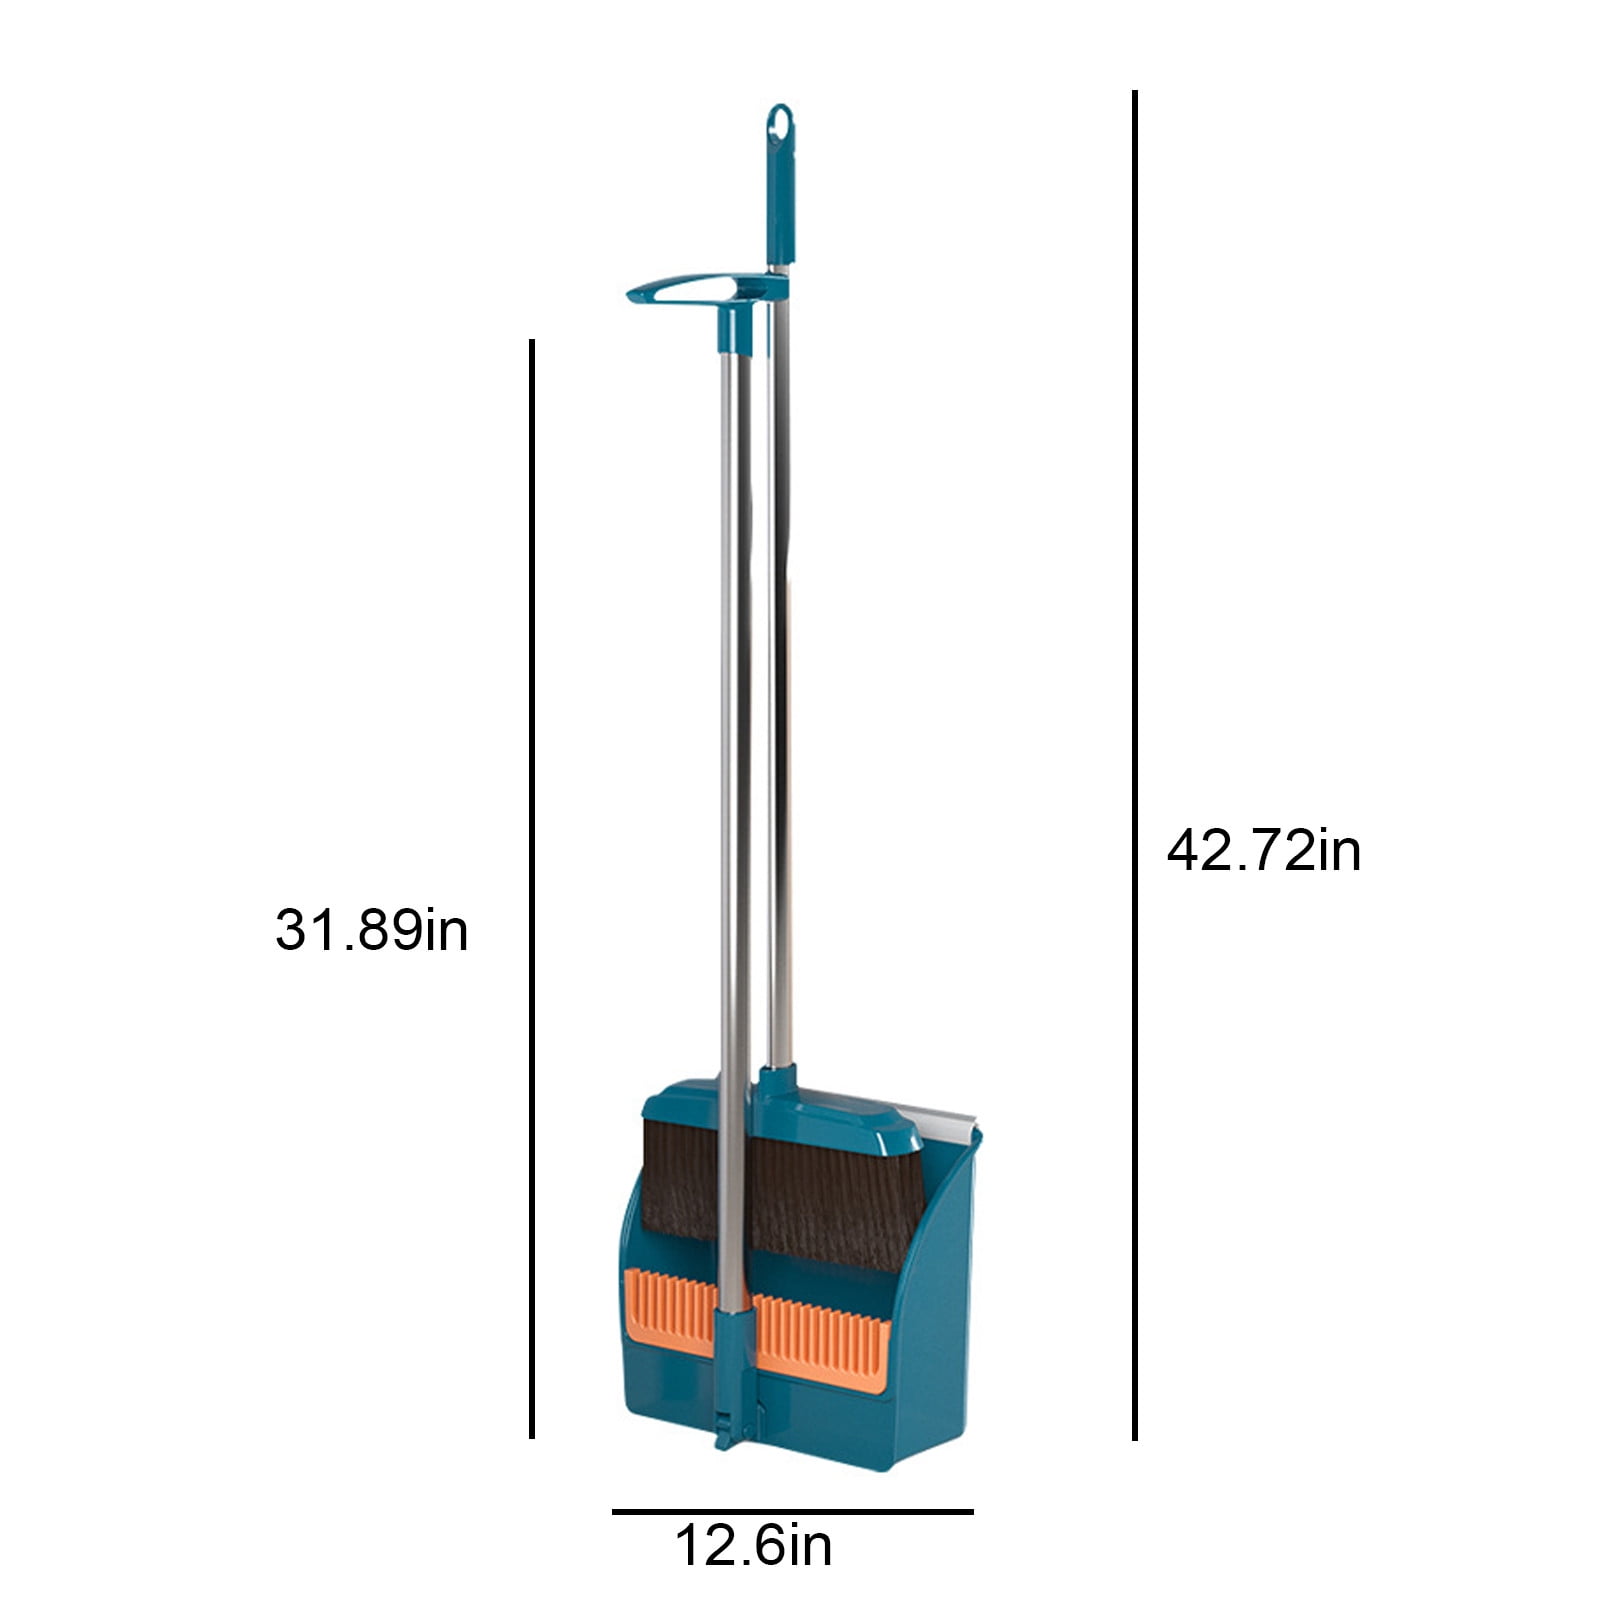 Almcmy Broom and Dustpan Set, 47 Long Handle Dust Pan and Broom Combo,  Upright Standing Dustpan with Self-Cleaning Teeth, Stand Up Broom and  Dustpan